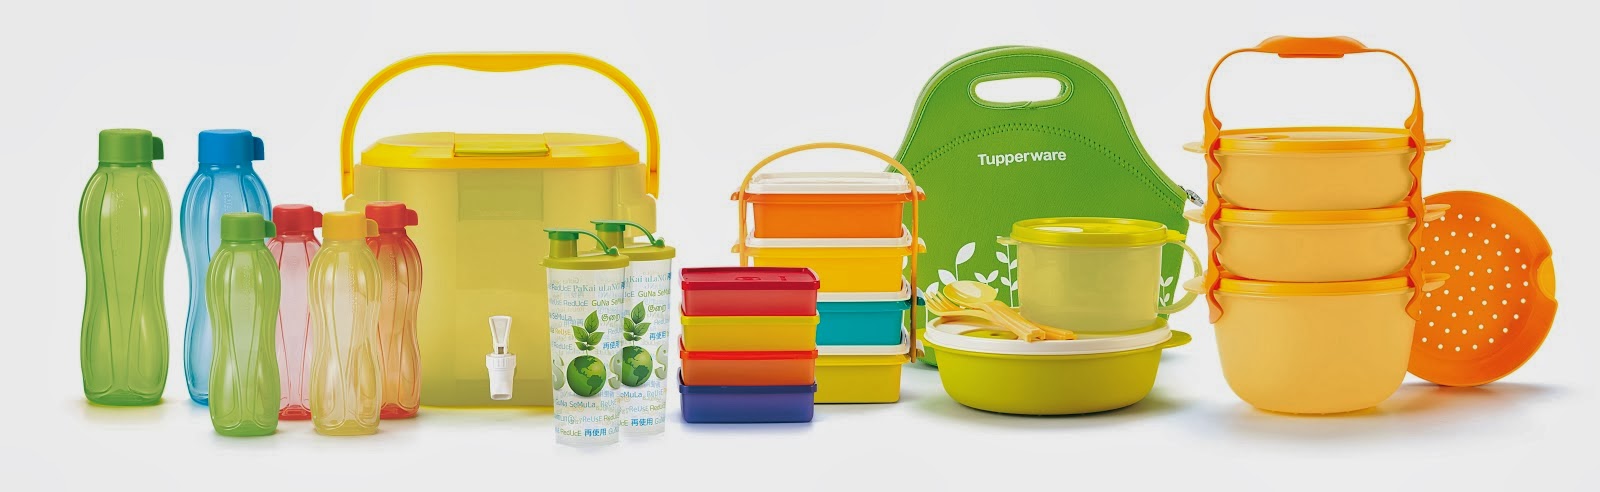 Supply Chain Management: Tupperware - Products that Simplify ...